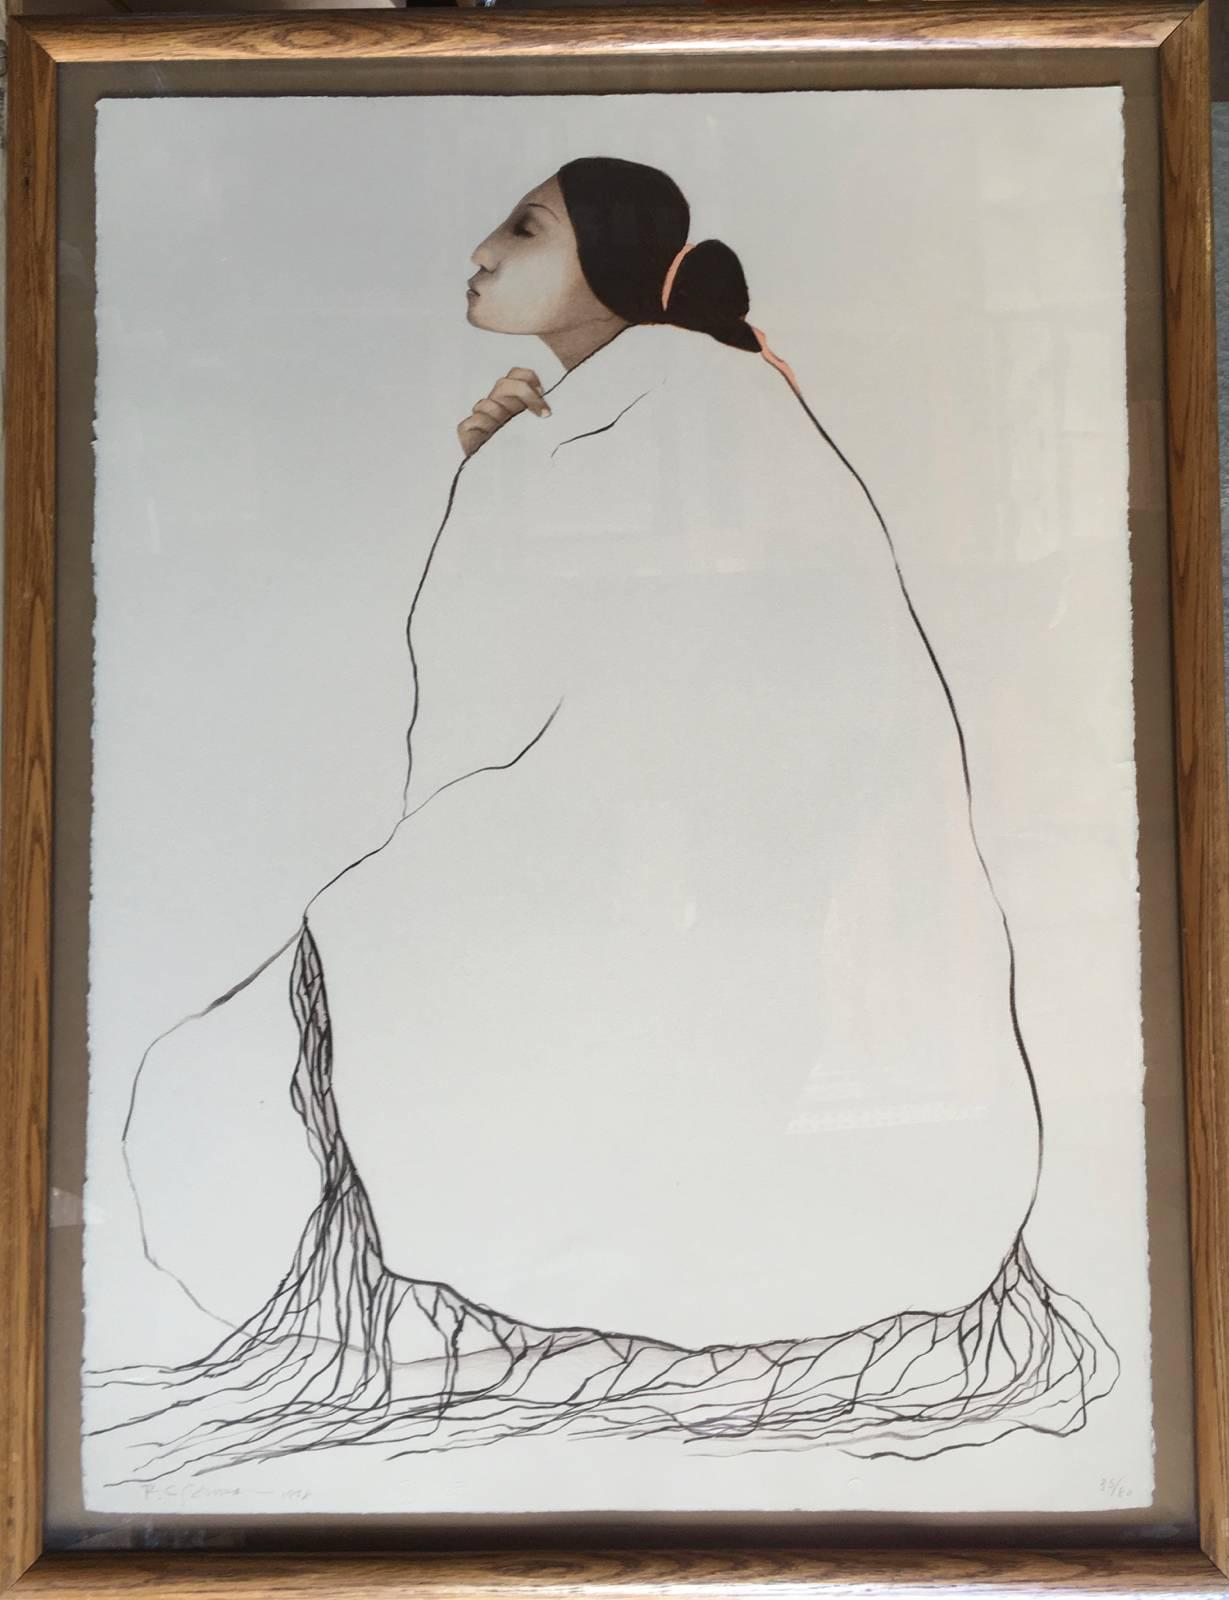 R.C. Gorman, Woman From Canyon de Chelly (State II), 1978, Lithograph, Signed.

Signed and dated lower left, numbered lower right 35/80, framed.

Measures: Height 30 in. x width 22 in. (sight).
Height 34 in. x width 26 in. (frame).

R. C.